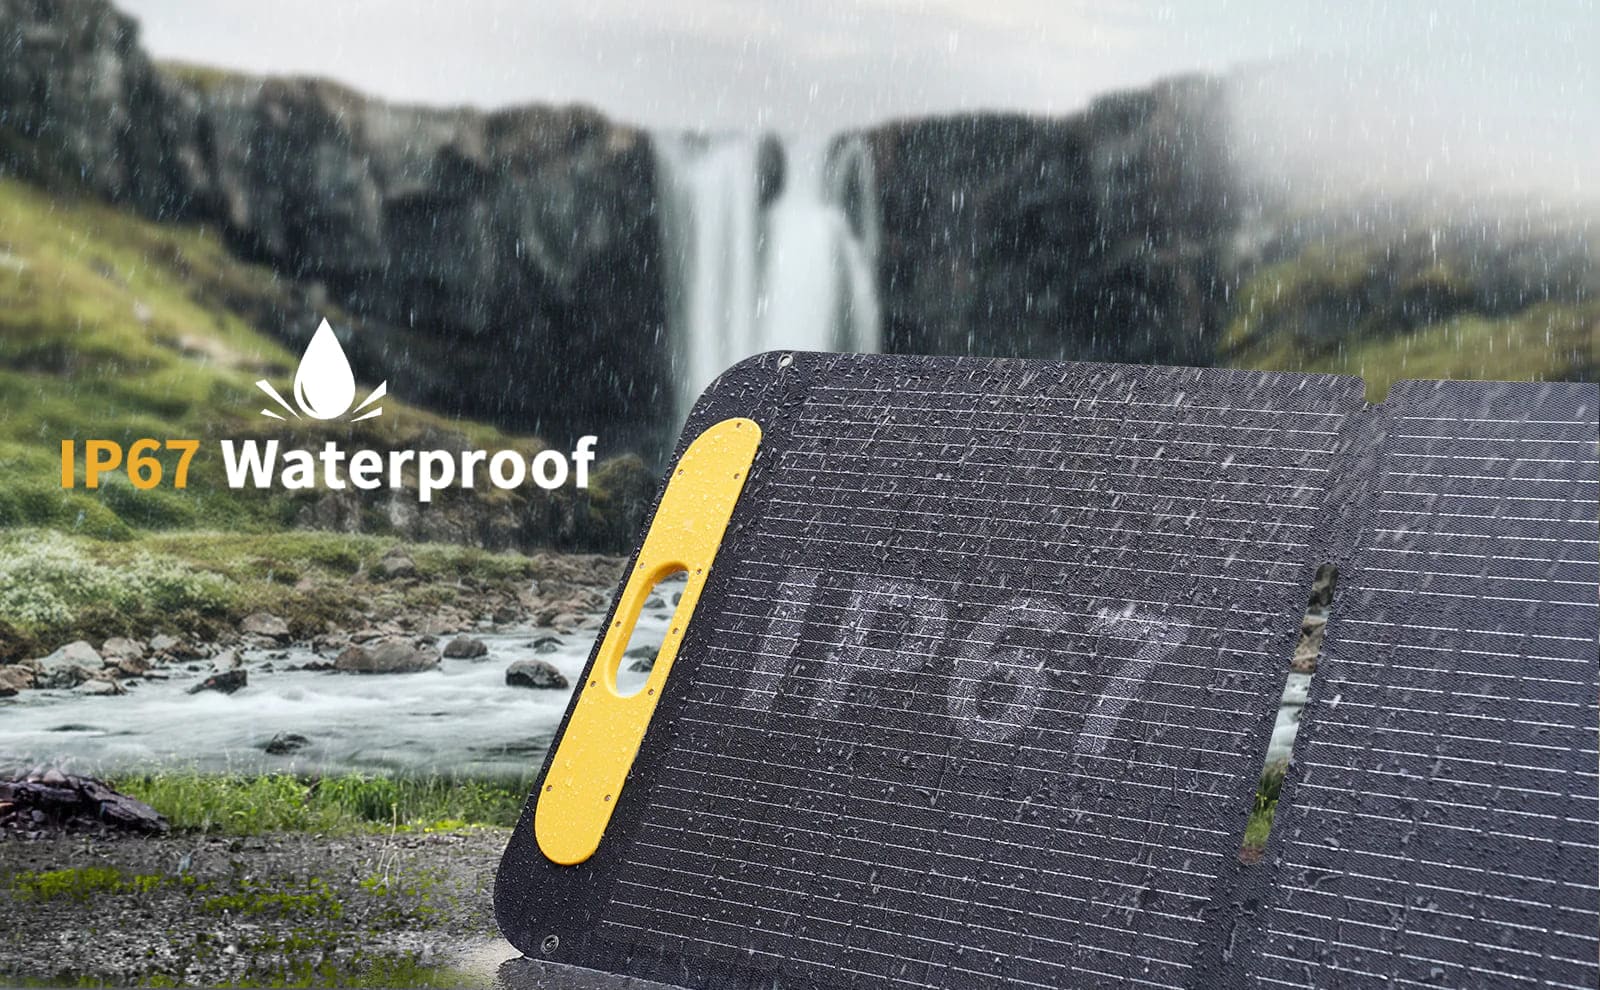 VTOMAN VS400 Pro solar panel features IP67 water-resistant rating that protects the panel from water splashing